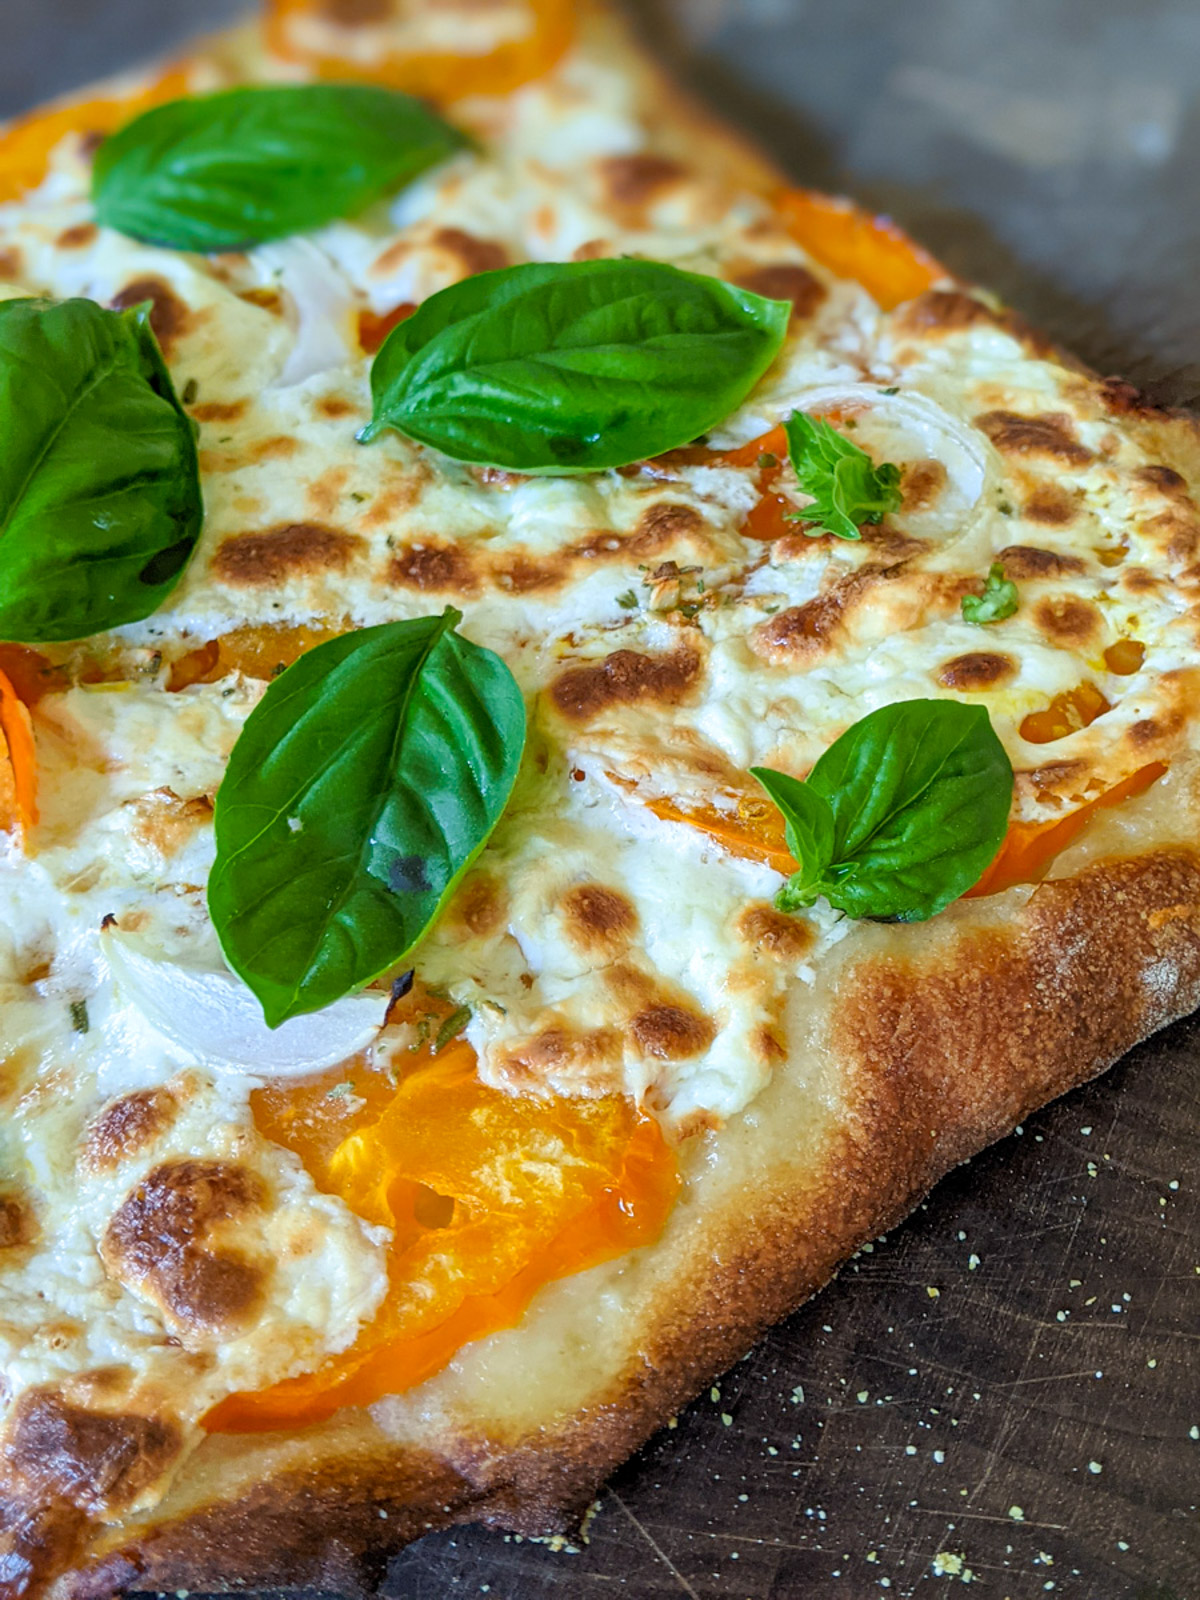 Homemade Pizza with yellow tomato slices, cheese and basil.